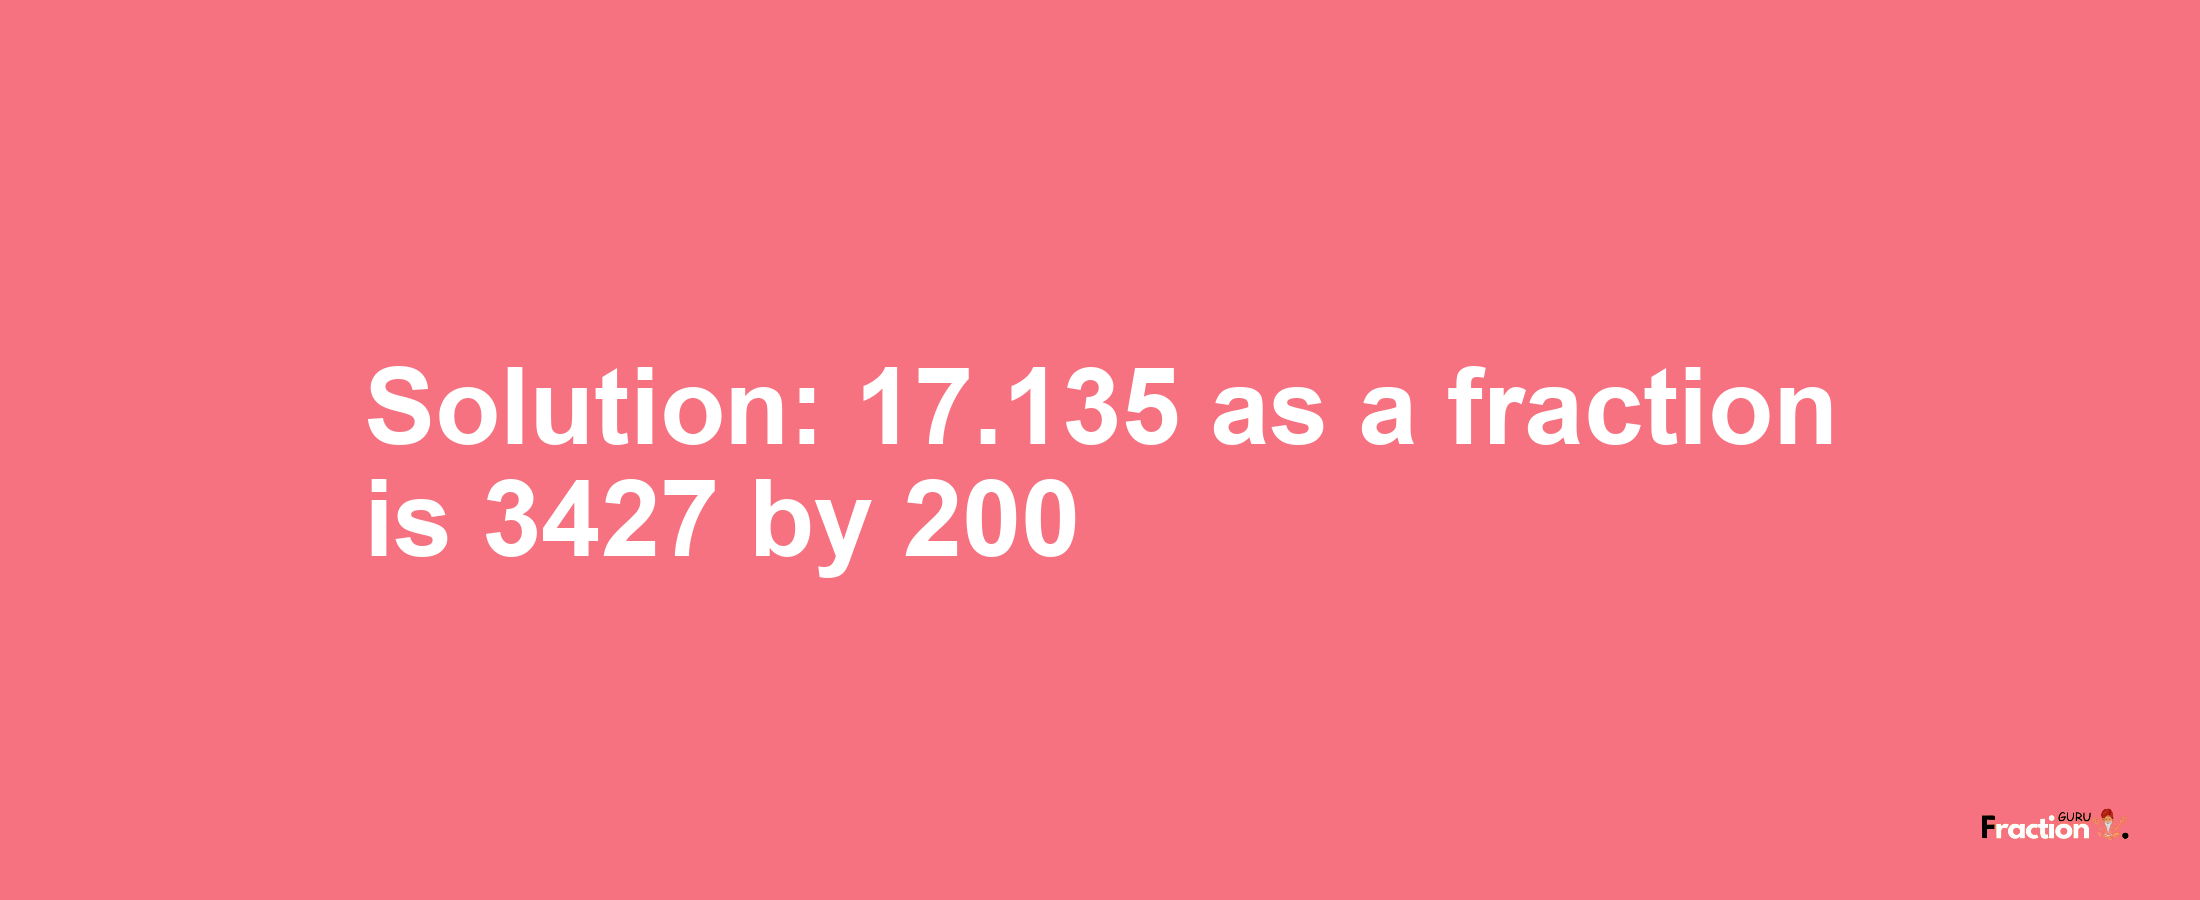 Solution:17.135 as a fraction is 3427/200